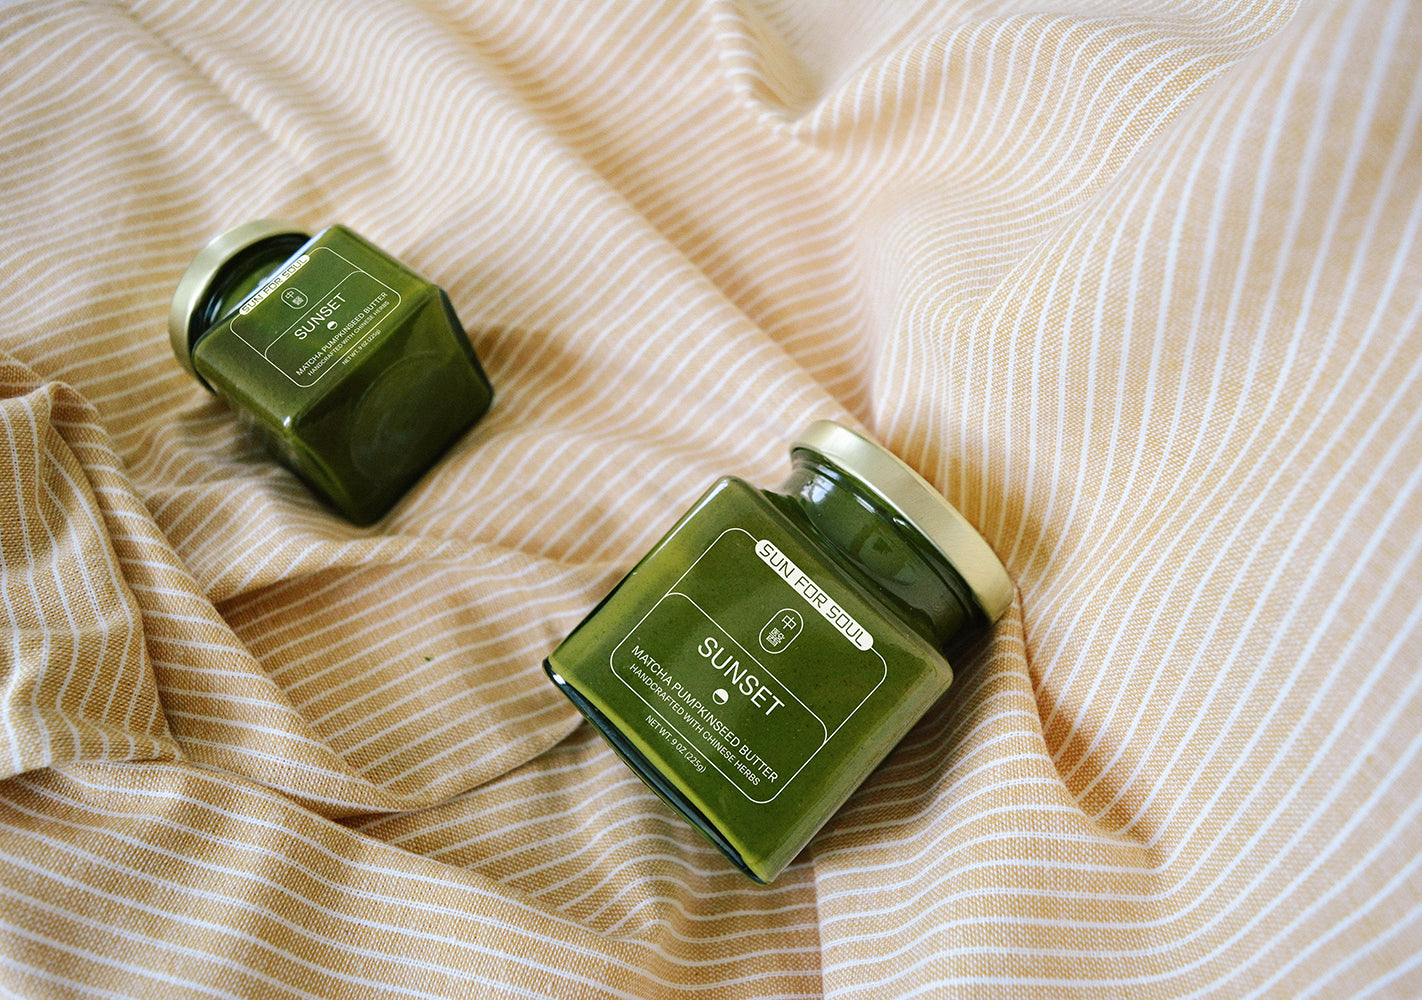 All about our Sunset Matcha sprouted pumpkin seed butter